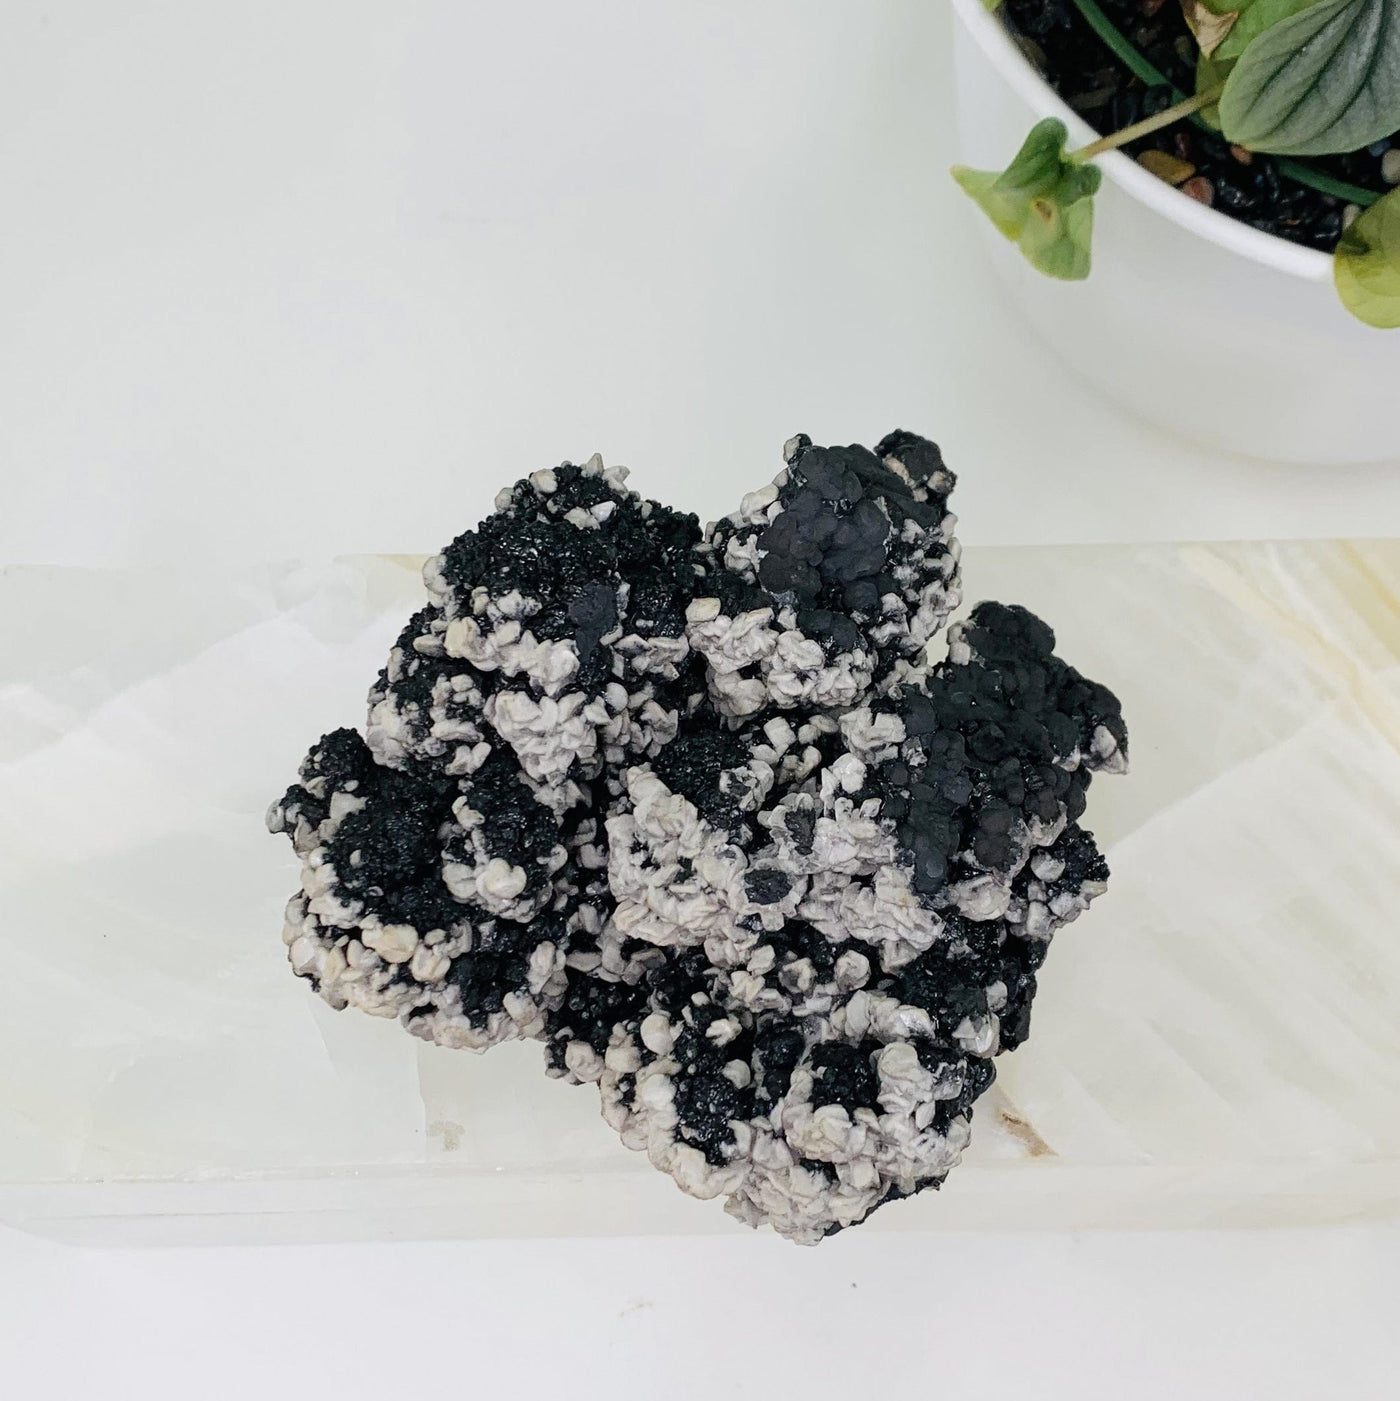 Top side view into goethite cluster, The picture is mainly focusing on the goethite bubbly formations within this cluster. The Goethite Cluster is also being displayed on a white marbled surface and background. 